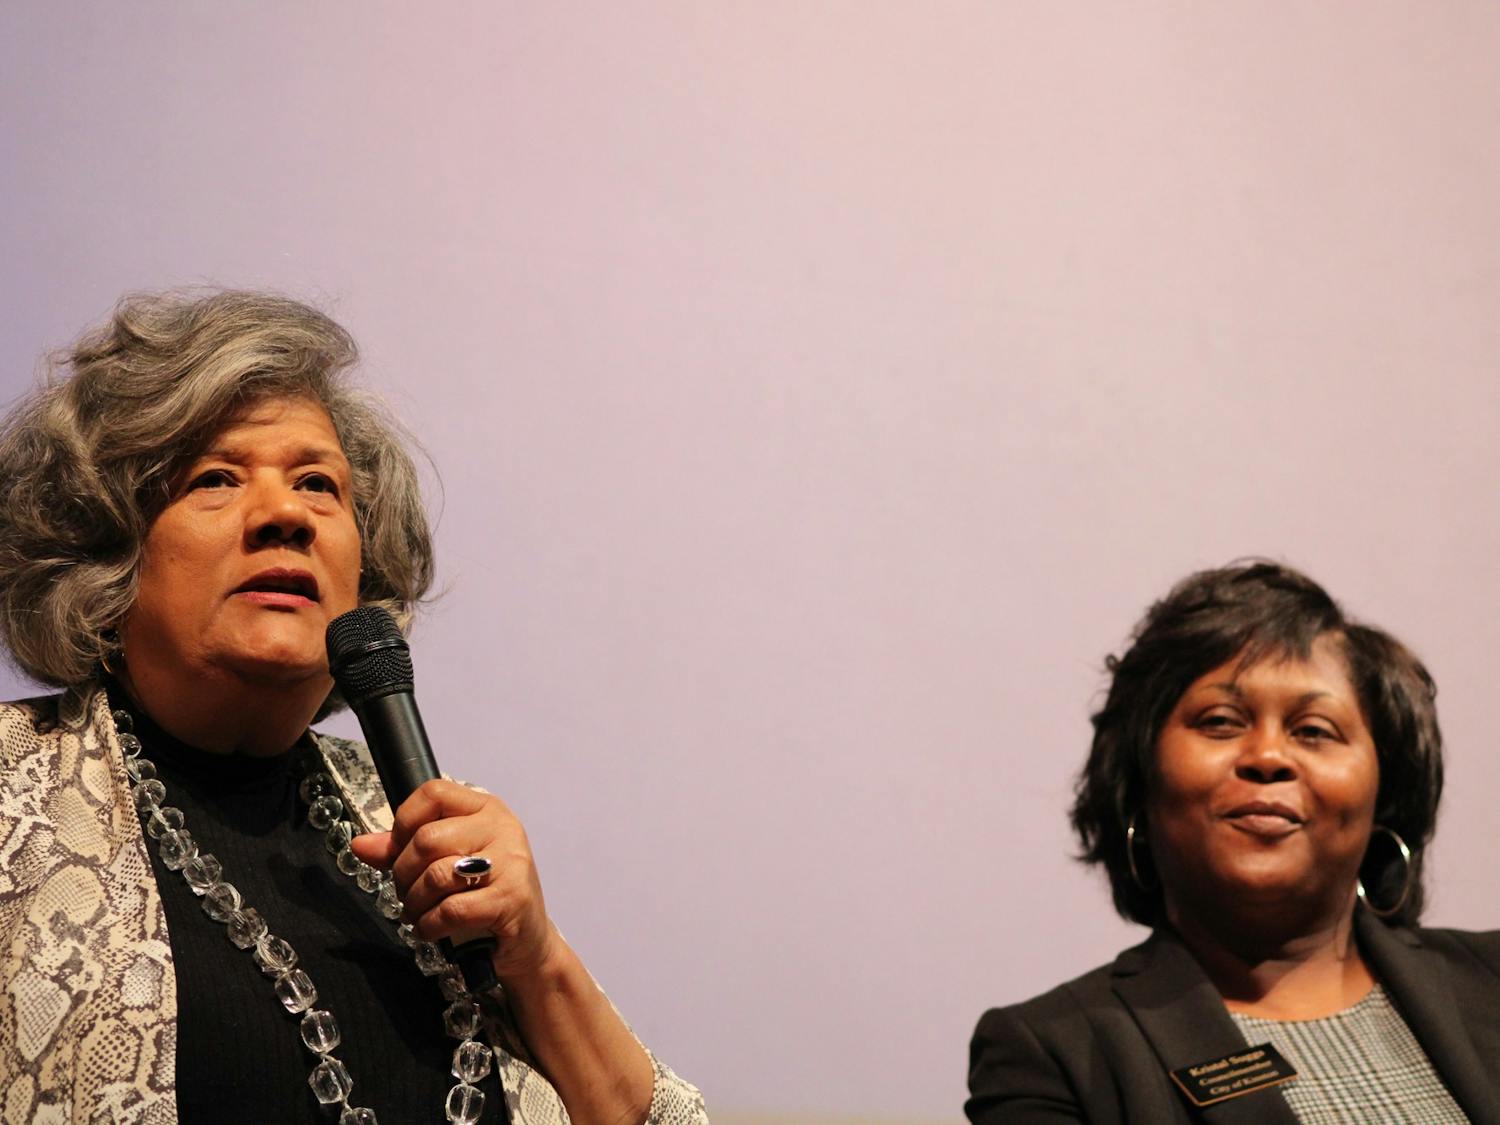 Yvonne Holley (left) speaks on why she is running for Lieutenant Governor while Krystal Suggs (right) smiles during the Black Women Lead event held by the UNC Black Student Movement in the Stone Center on Monday, Feb. 10, 2020. The event focused on discussion with four black, female-identifying politicians and their platforms for the 2020 election.&nbsp;